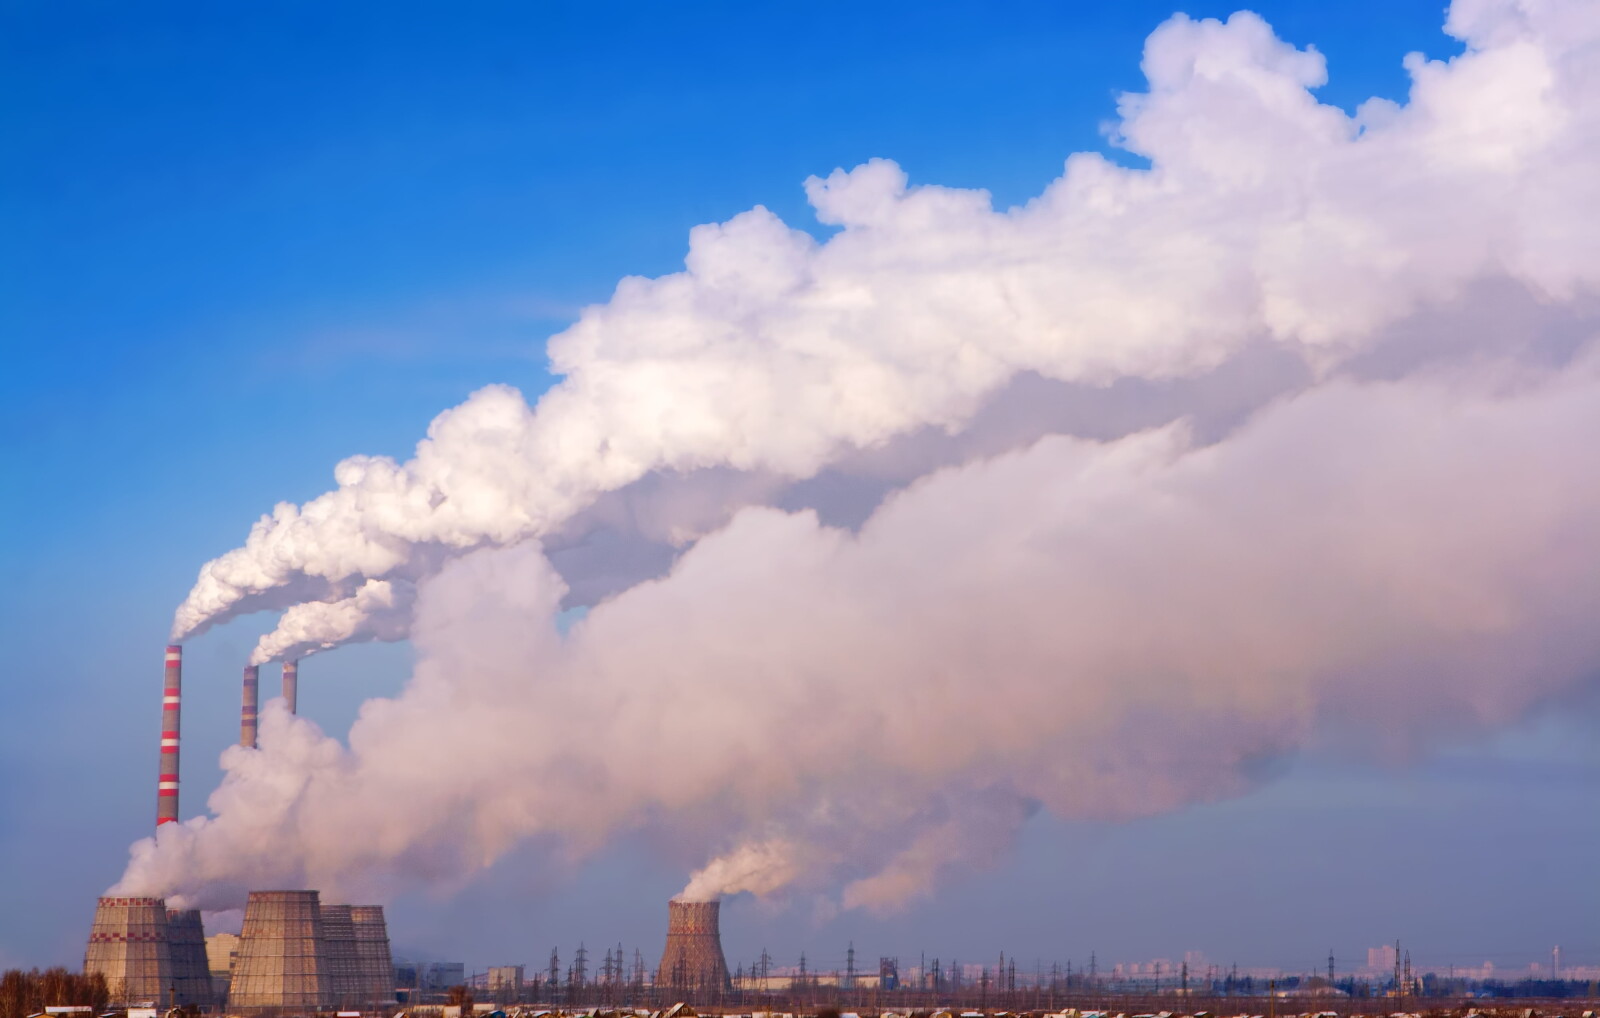 Understanding Air Pollution Class Action Claims